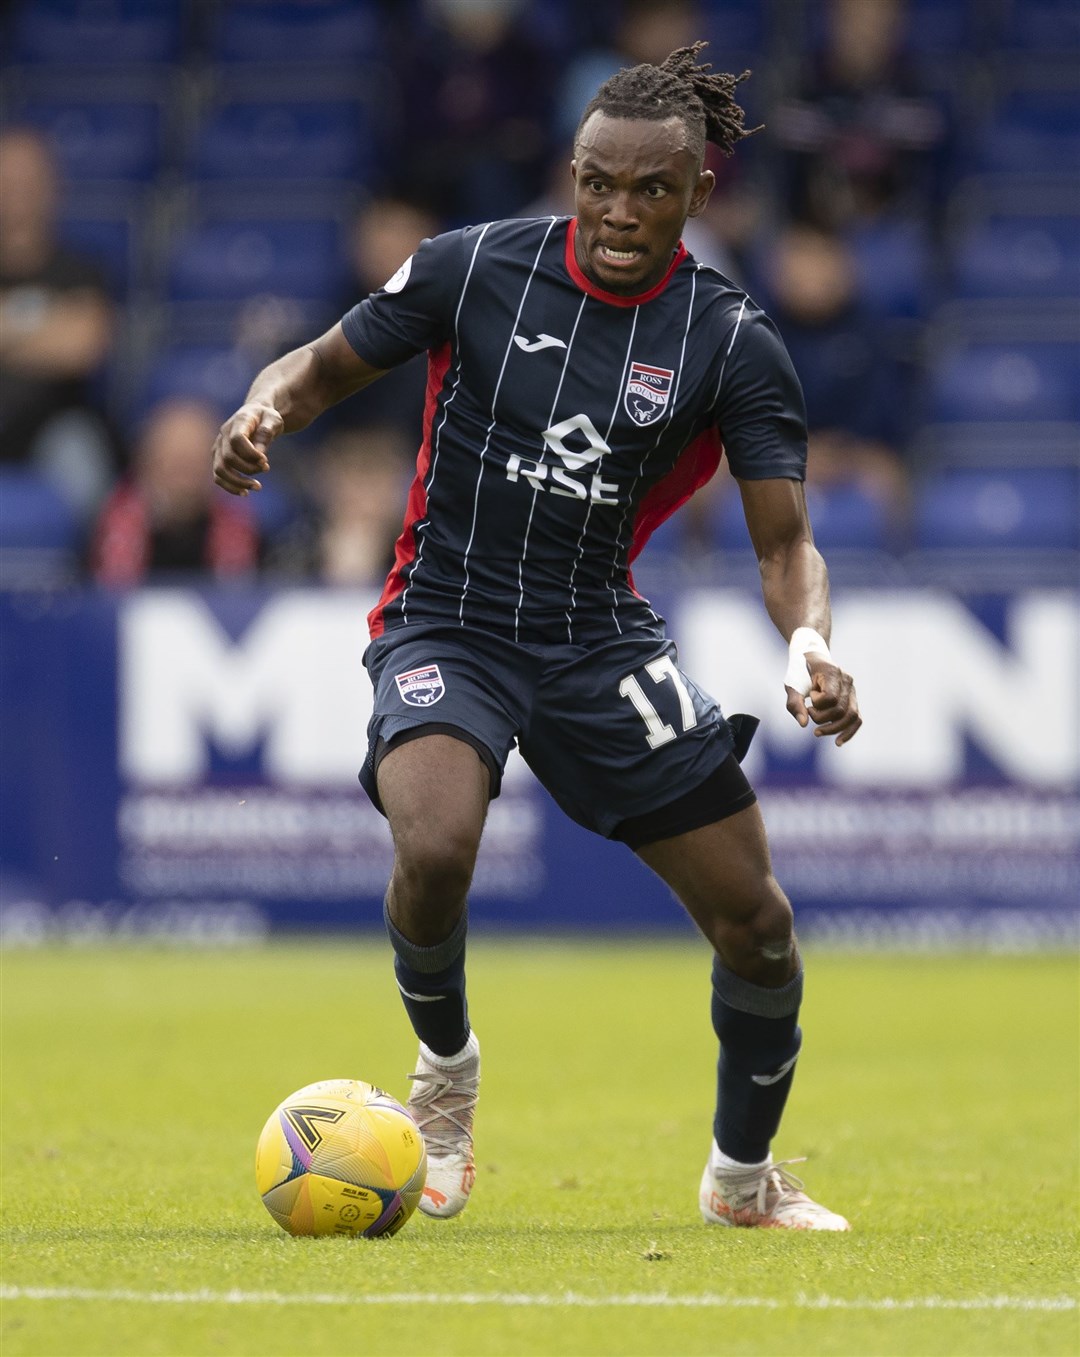 Regan Charles-Cook put Ross County in front